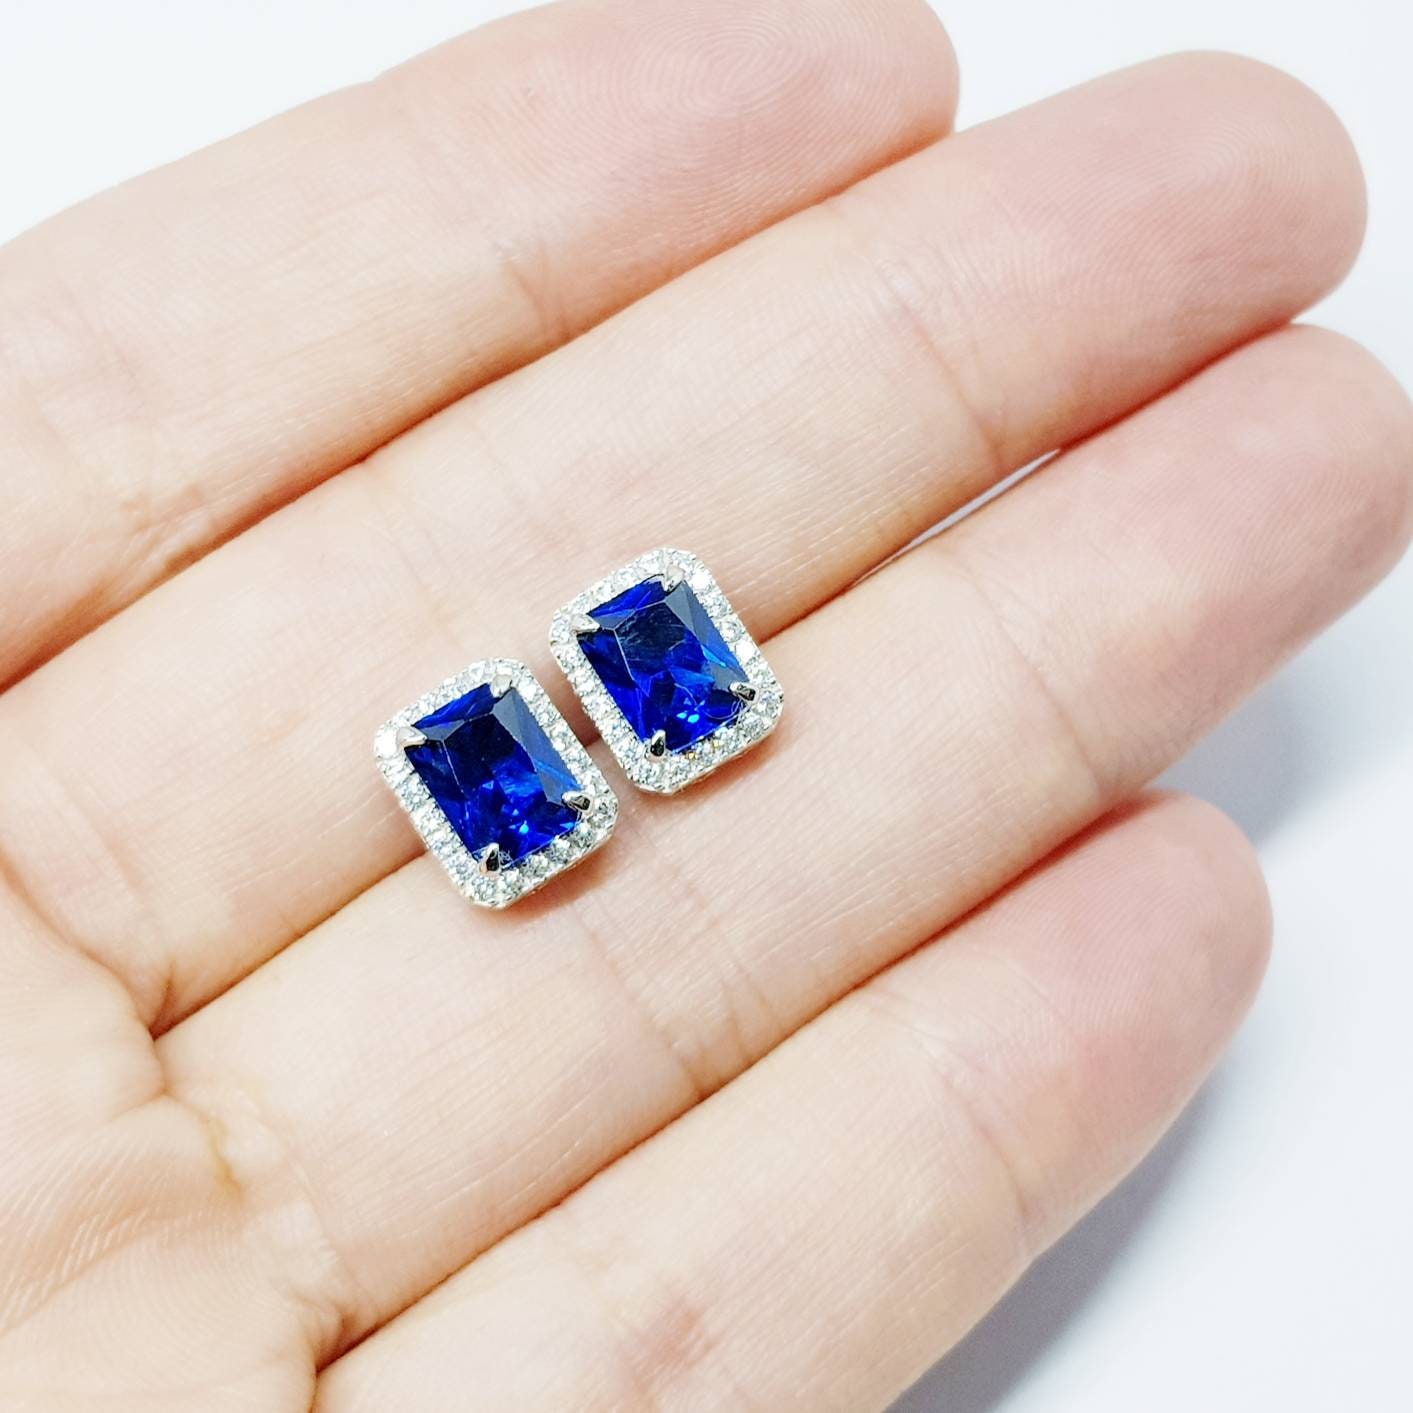 Blue Sapphire Stud Earrings, Halo Stud Earrings, 925 Sterling Silver Stud for Women, Gift For Her, Bridesmaids Gift